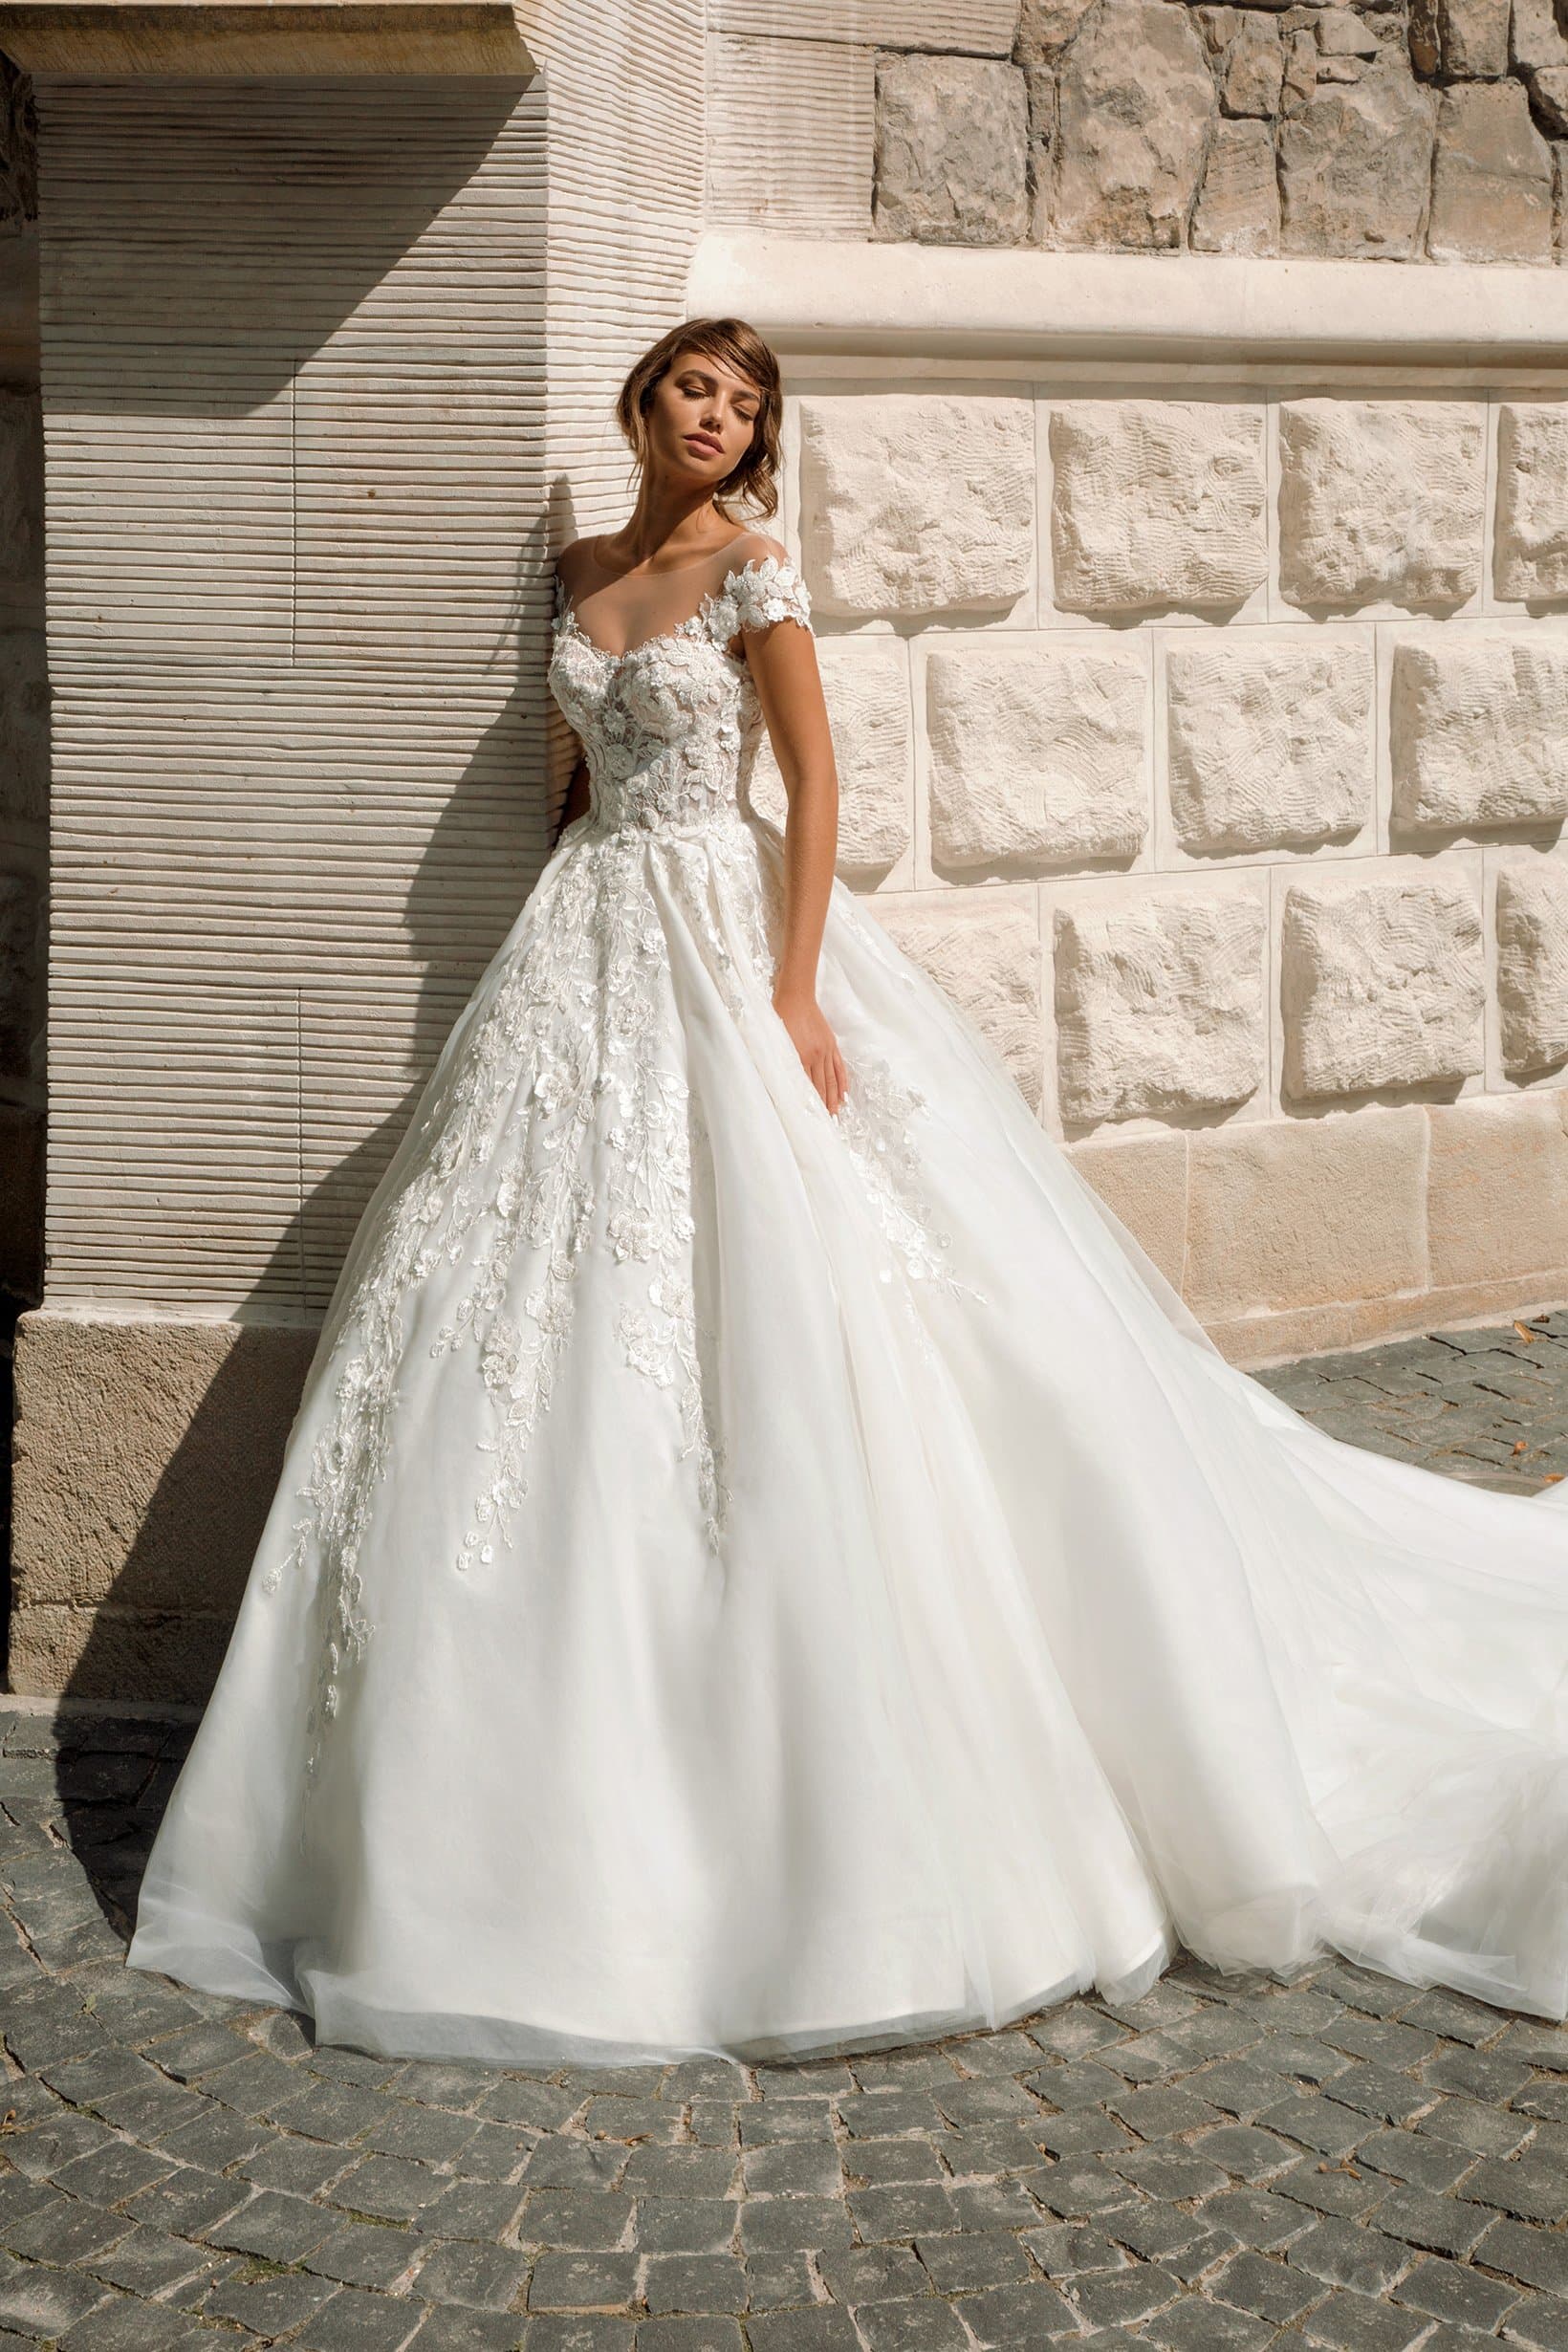 Wedding dress Monica Product for Sale at NY City Bride